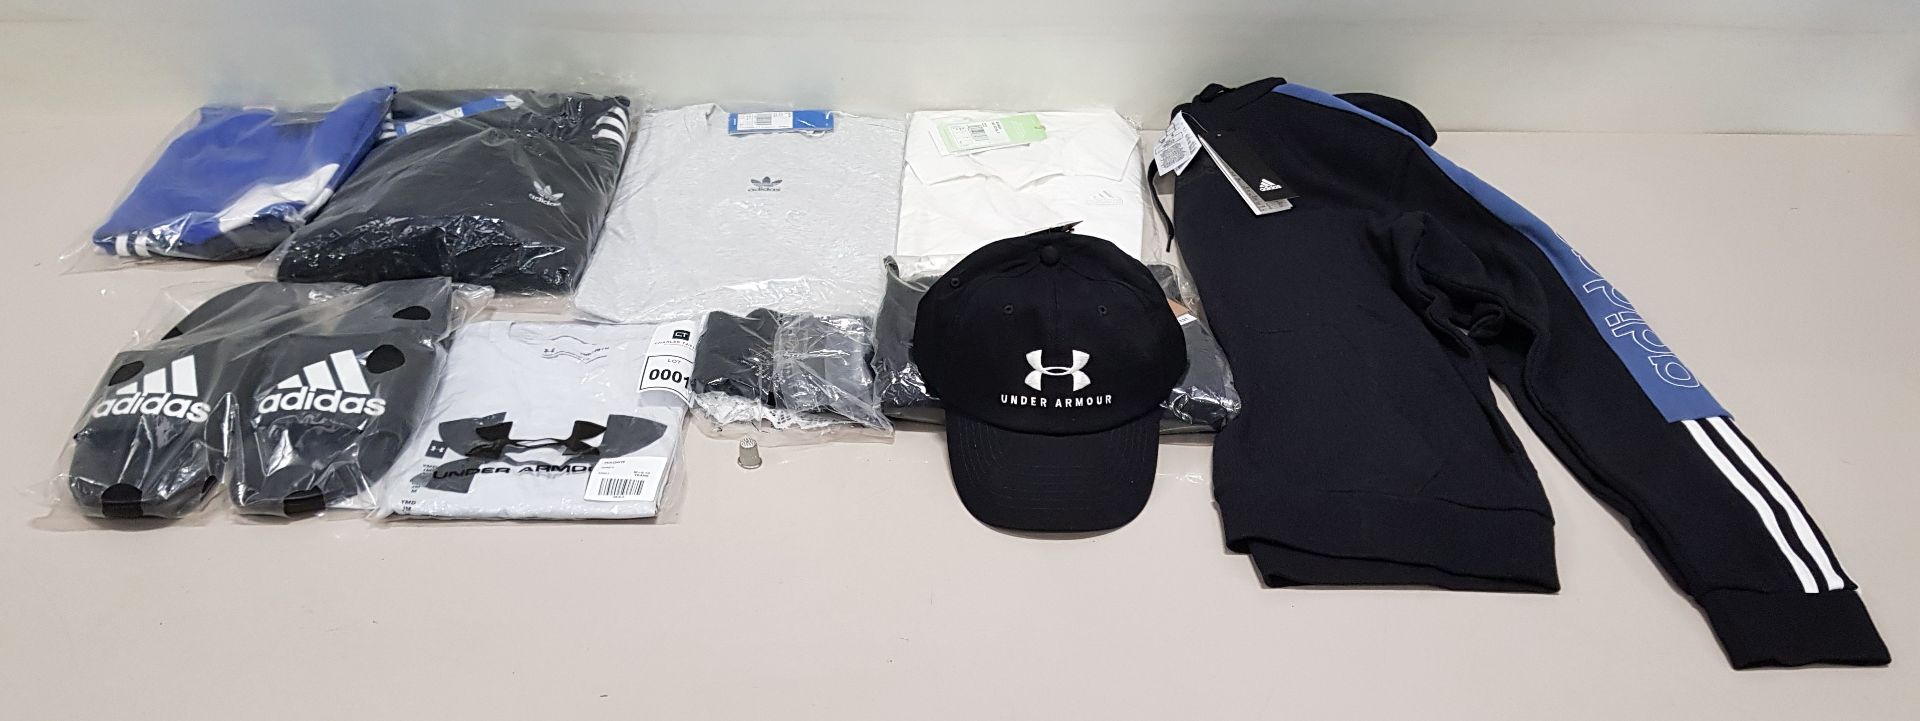 10 PIECE CLOTHING LOT CONTAINING AN UNDER ARMOUR HAT, ADIDAS SLIDERS, UNDER ARMOUR T SHIRT AND AN